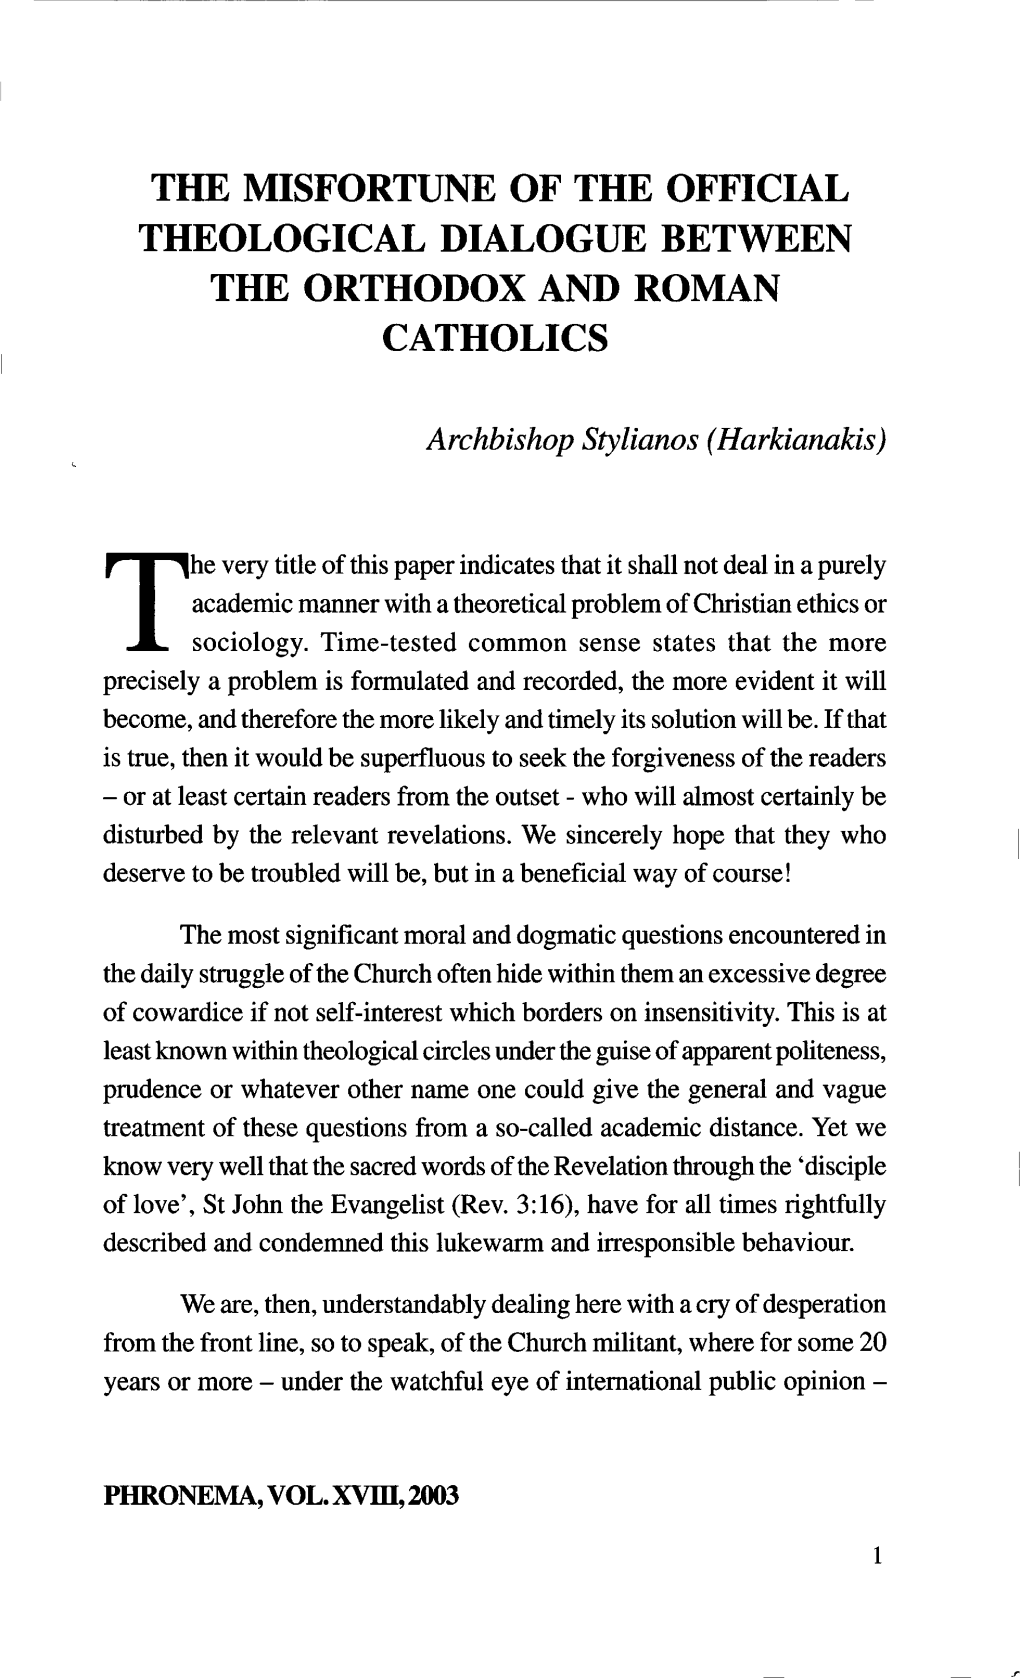 The Misfortune of the Official Dialogue Between the Orthodox and Roman Catholics